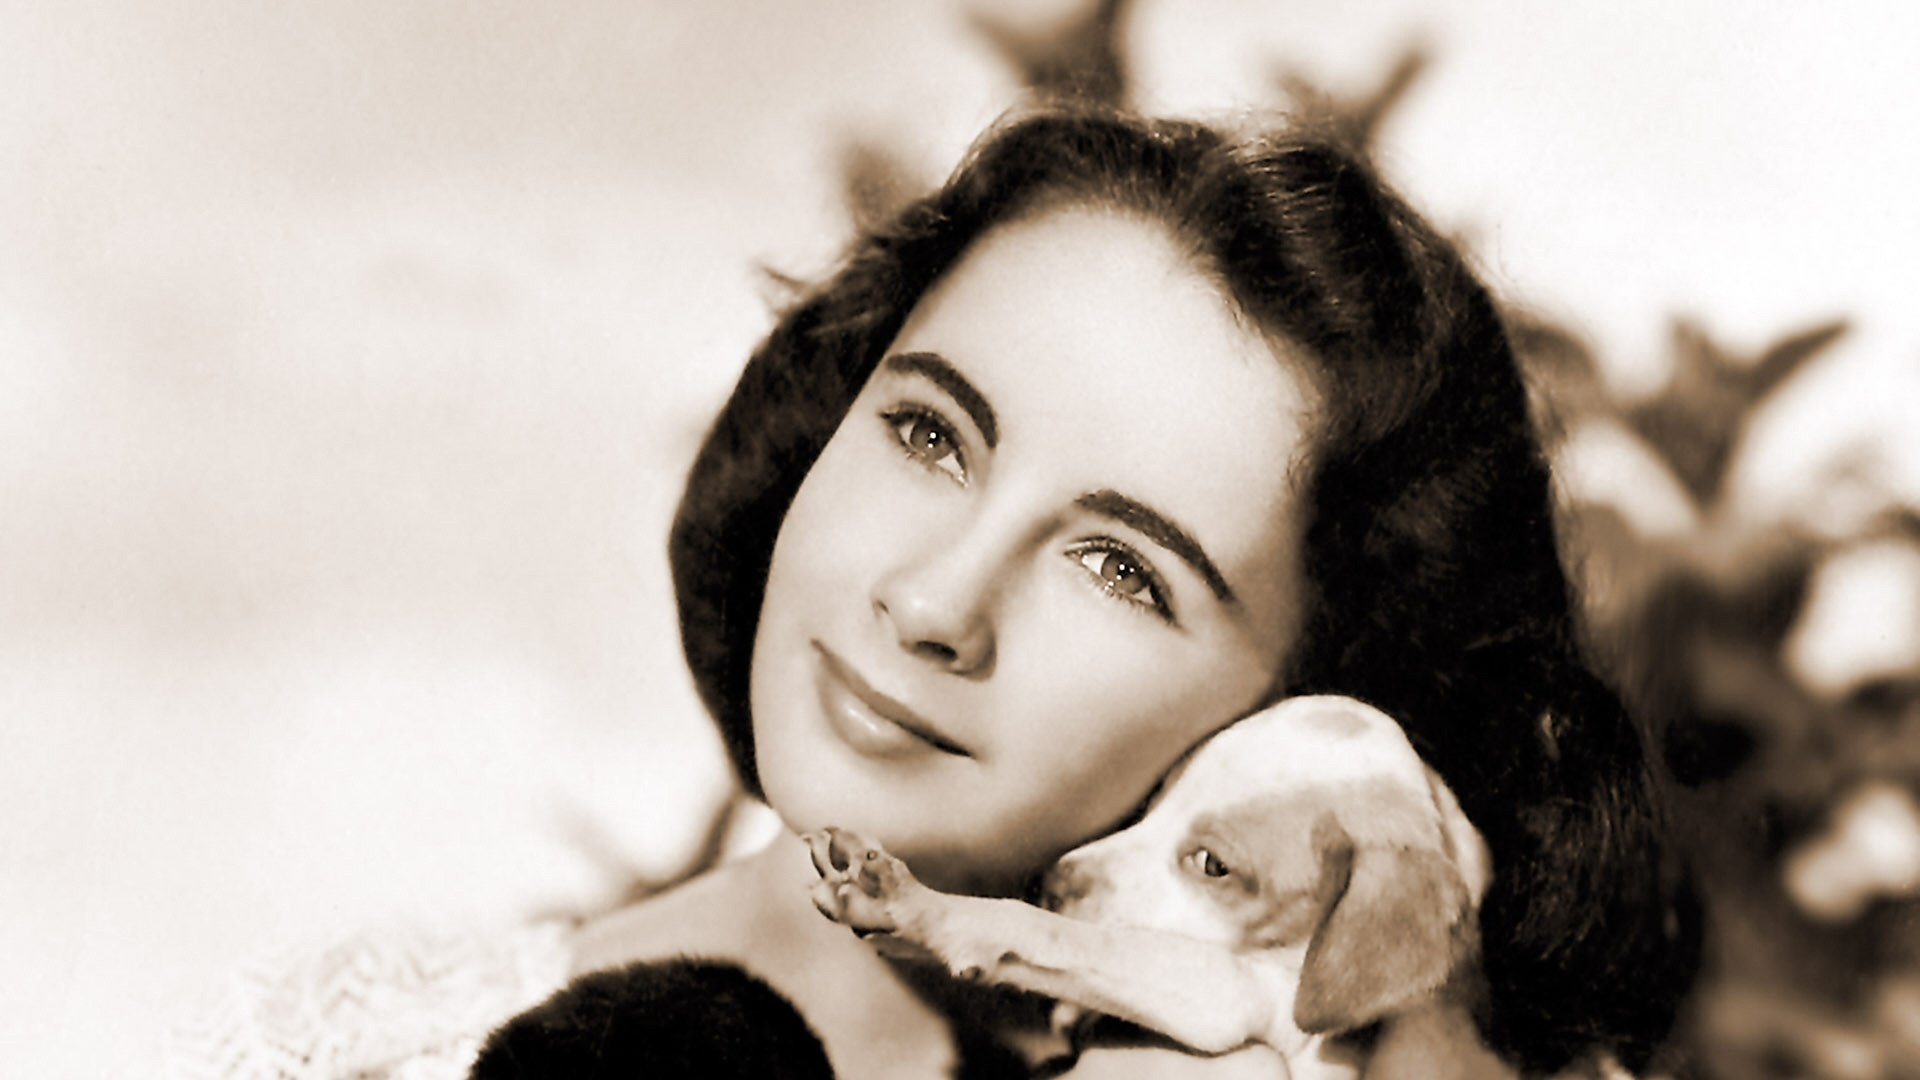 Elizabeth Taylor Wallpaper High Resolution And Quality